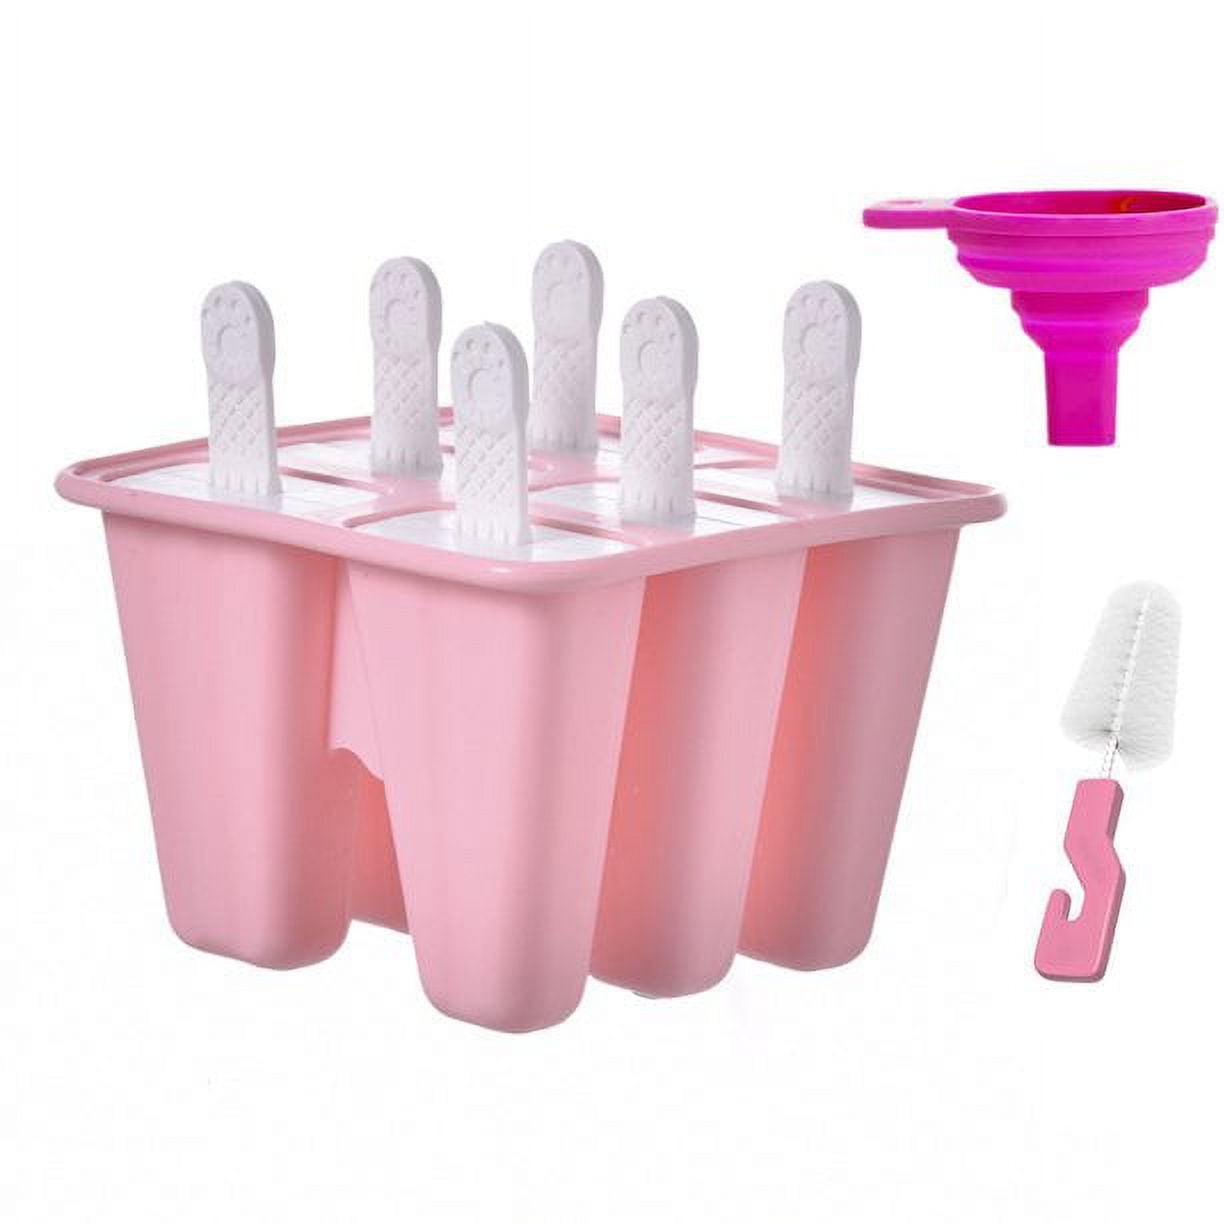 12 Cavities Silicone Popsicle Molds for Kids Adults Food Grade Popsicle  Maker Molds Ice Pop Mold Hom - ASM040 - IdeaStage Promotional Products